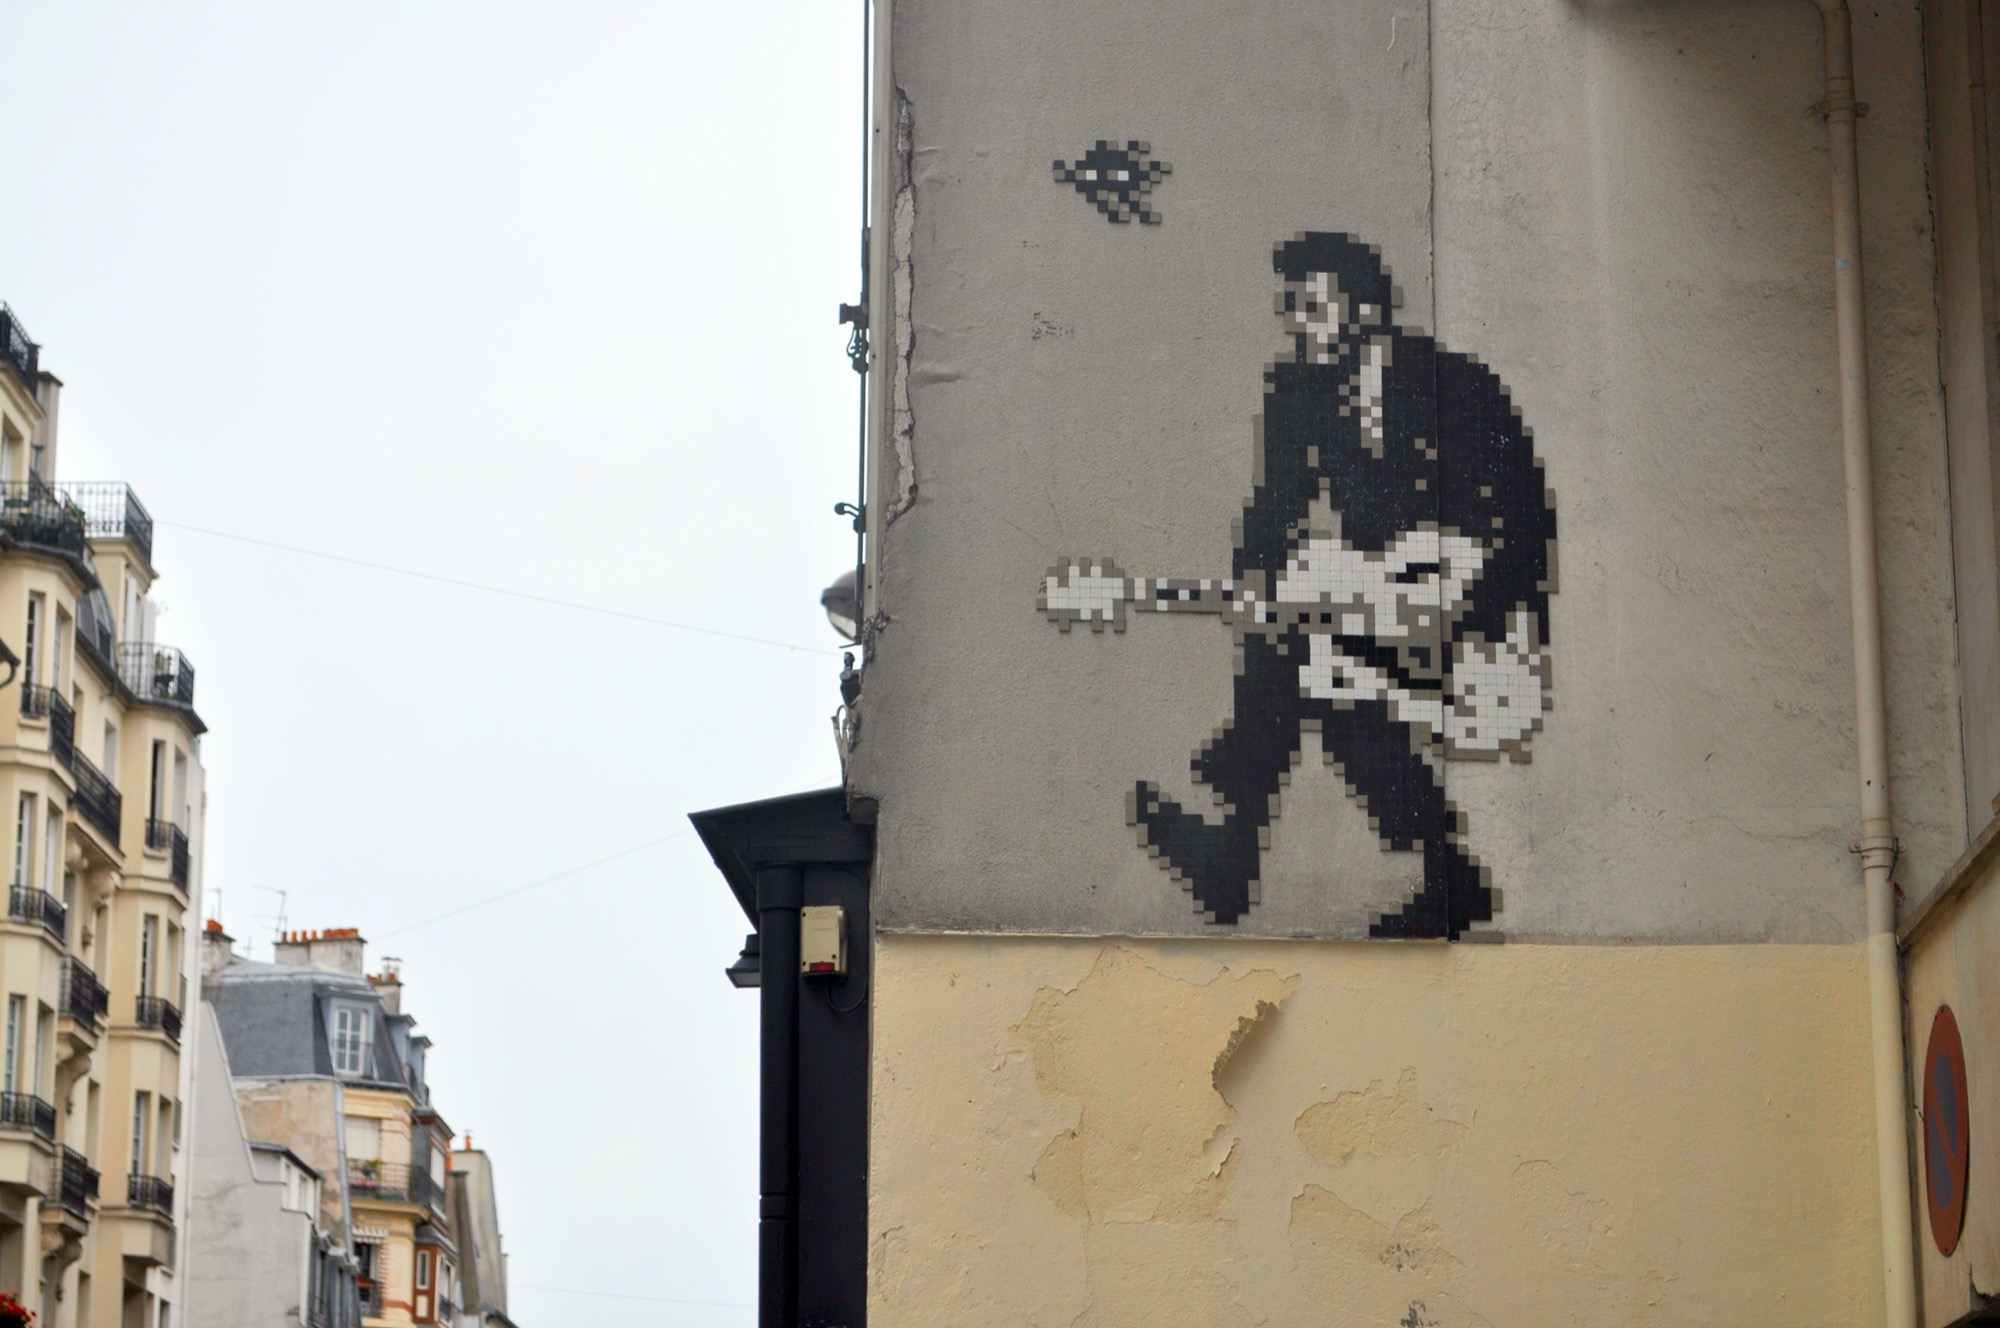 Mosaic 4504 Chuck Berry by the artist Invader captured by elettrotajik in Paris France